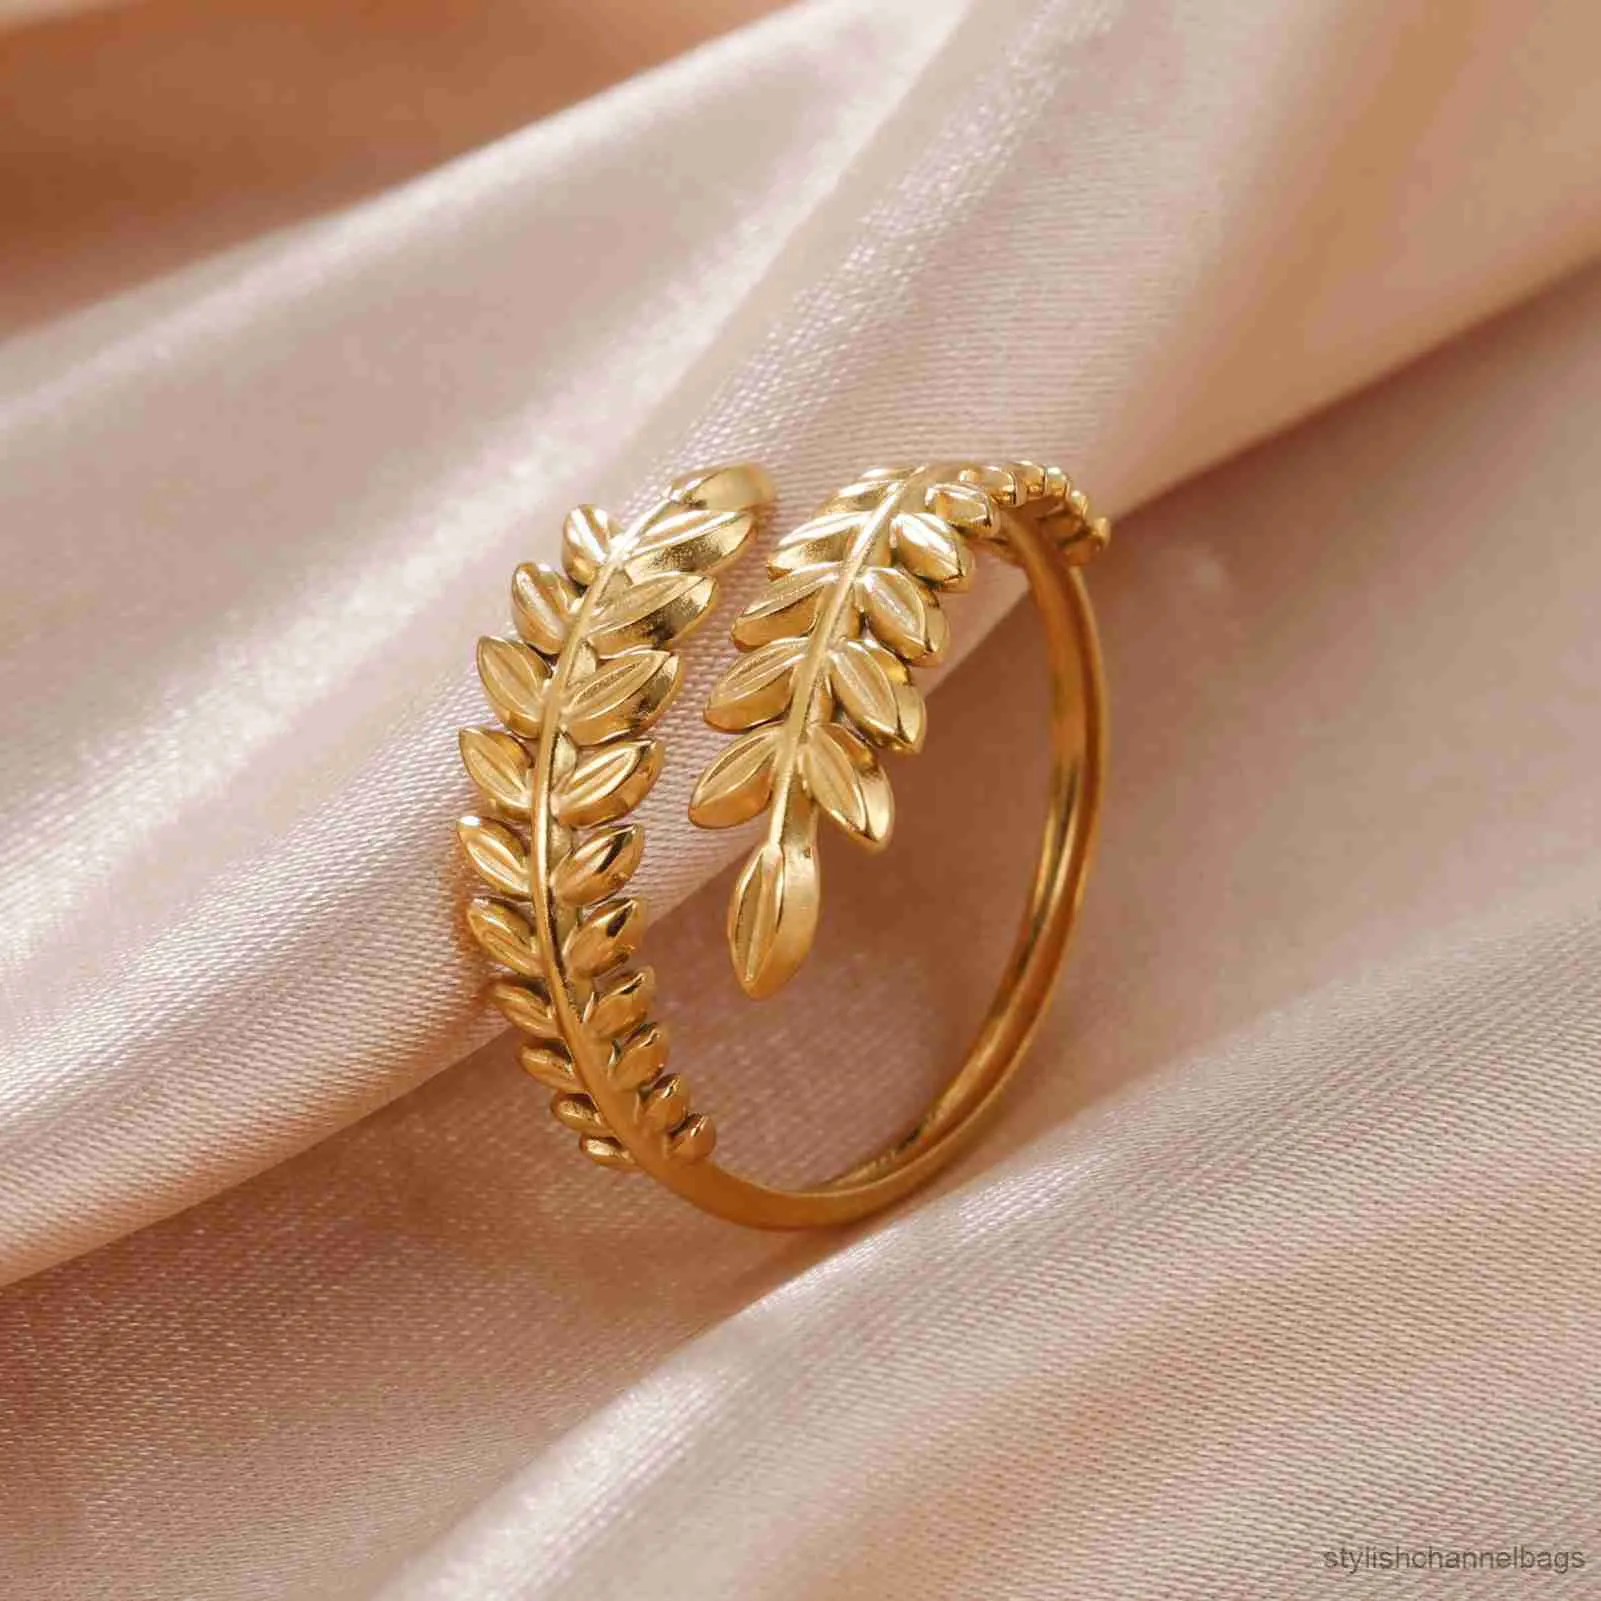 Band Rings Skyrim New In Wheat Ears Ring Stainless Steel Gold Color Open Women Rings 2023 Trendy Jewelry Valentine Gift